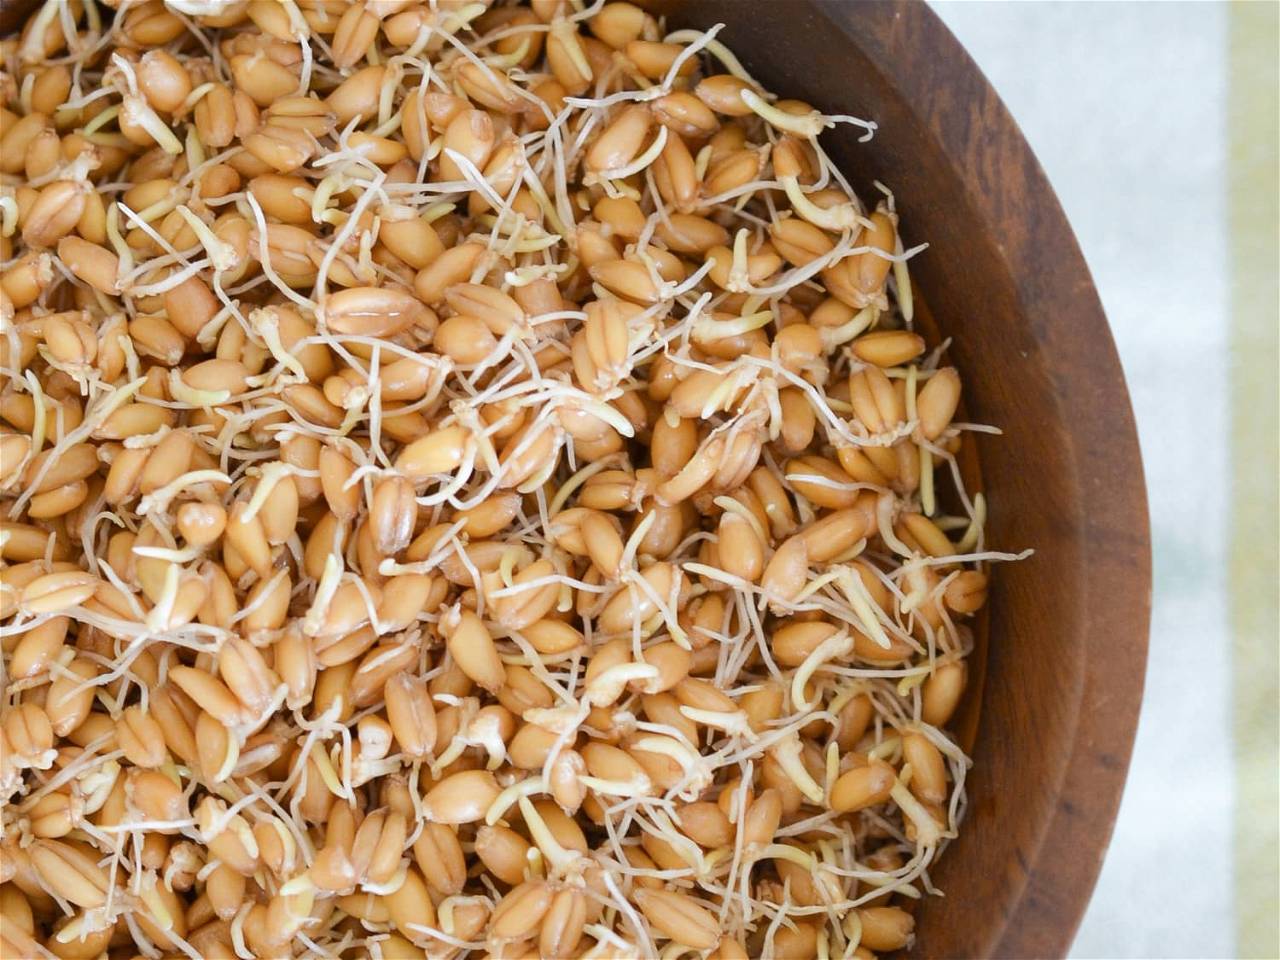 Wheat sprouts in the bowl